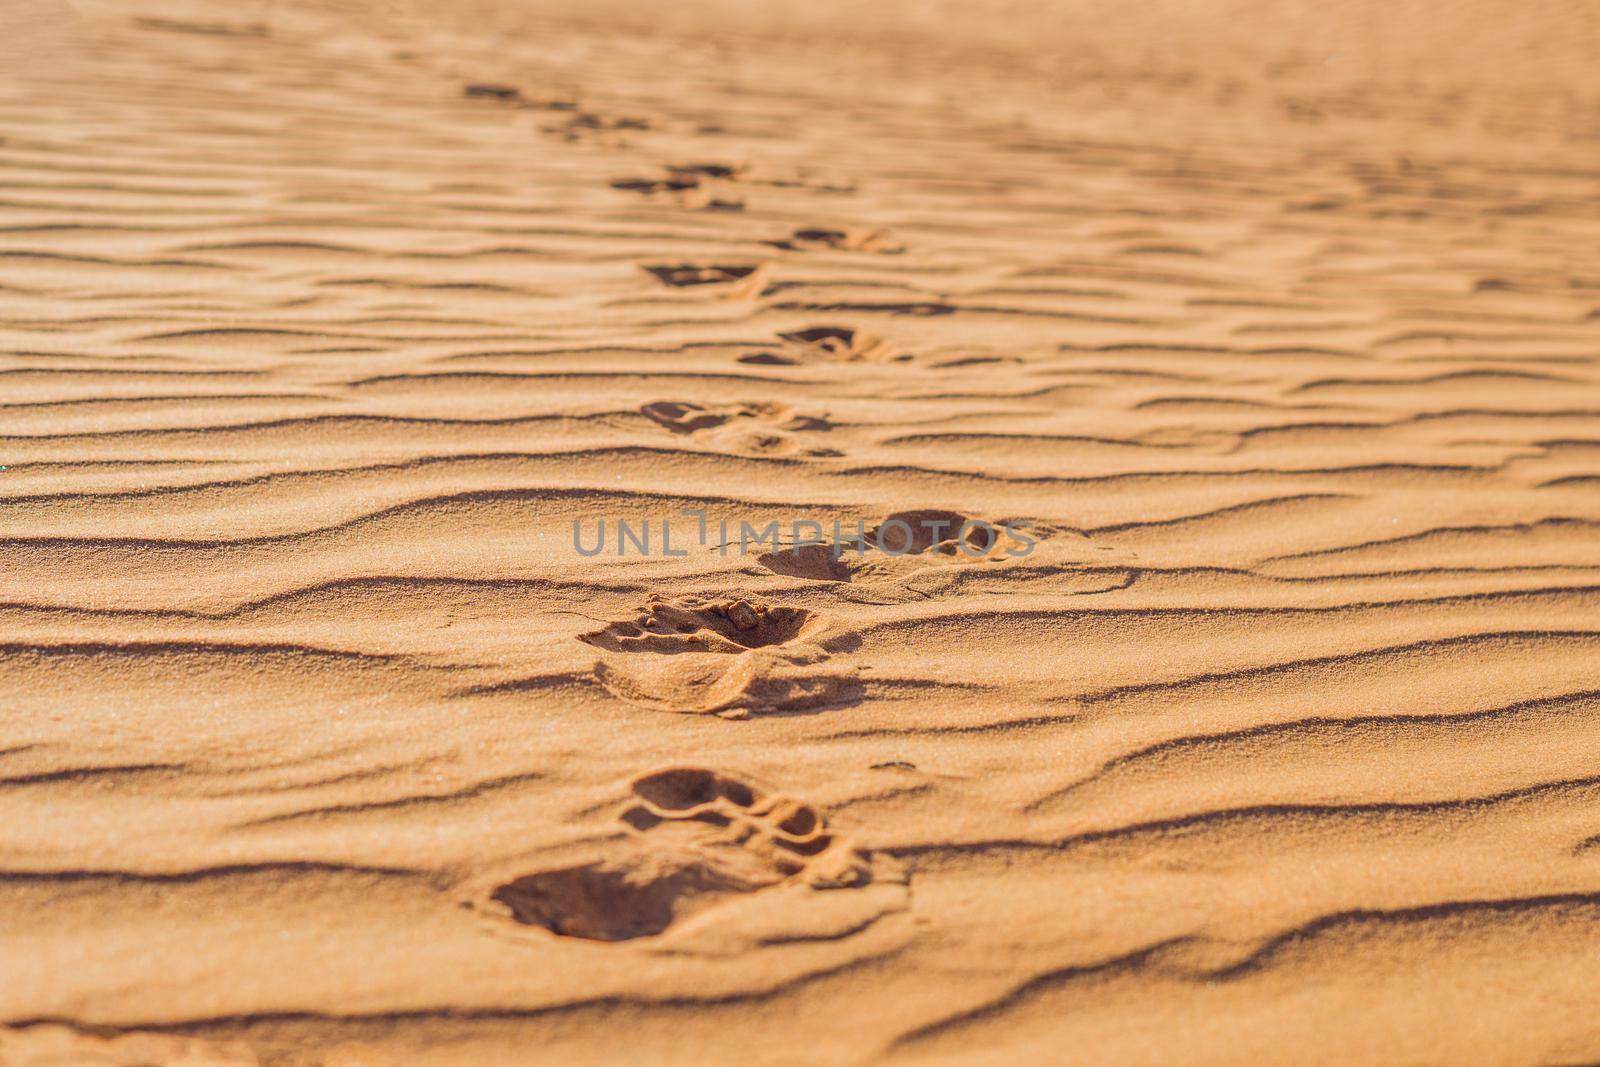 Footprints in the sand in the red desert at Sunrise by galitskaya